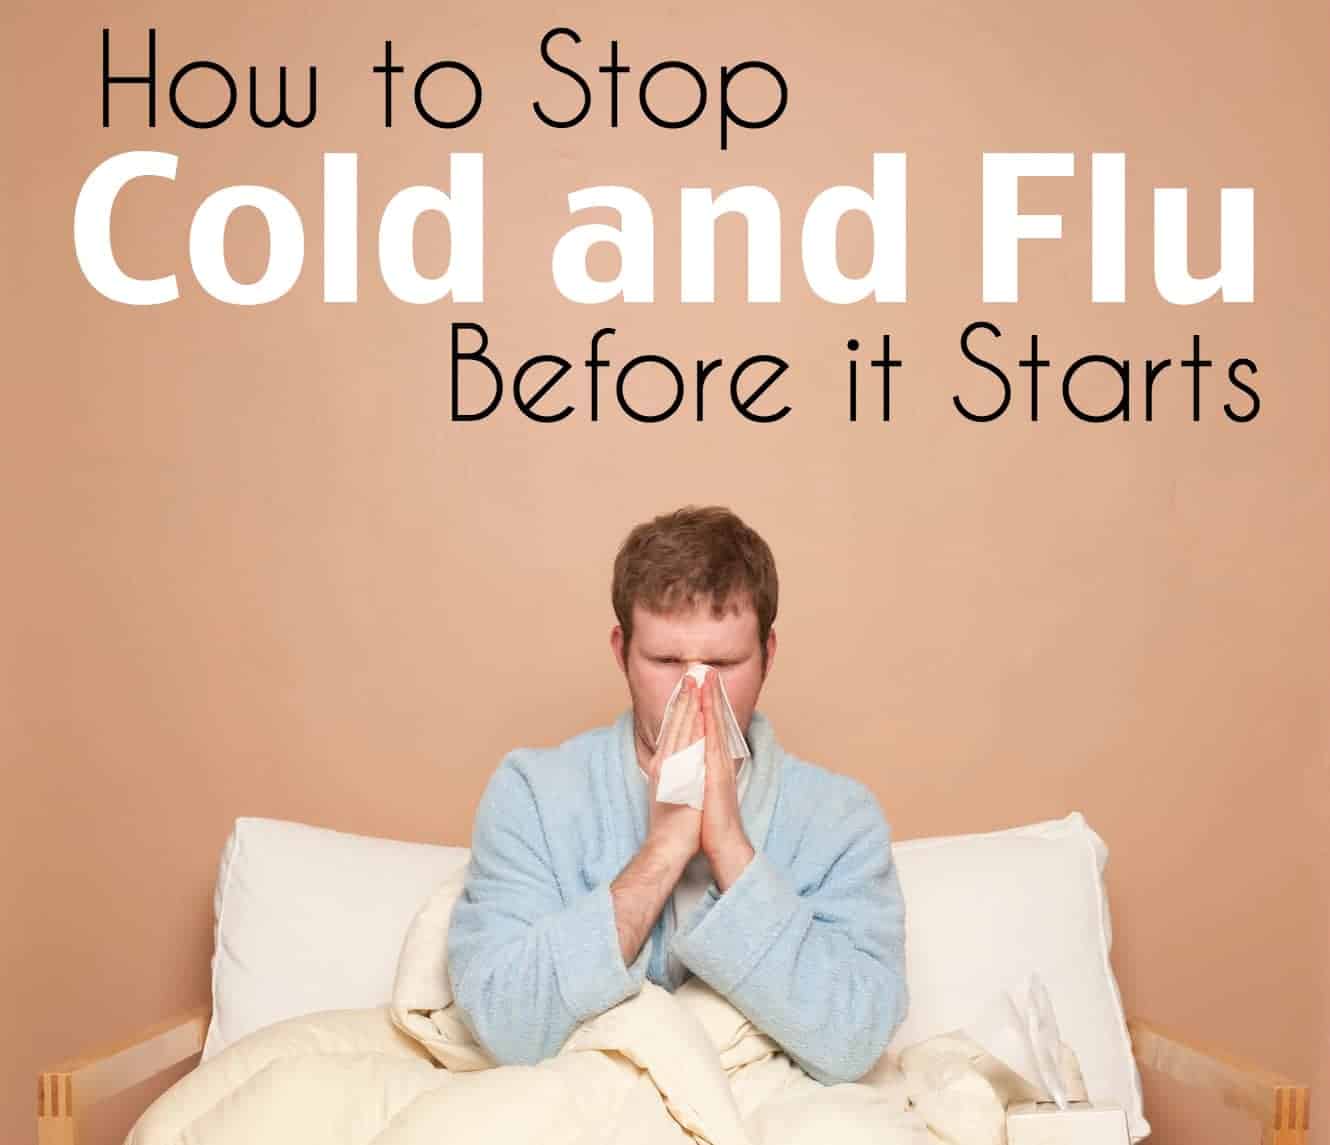 How to Stop Cold and Flu Before it Starts